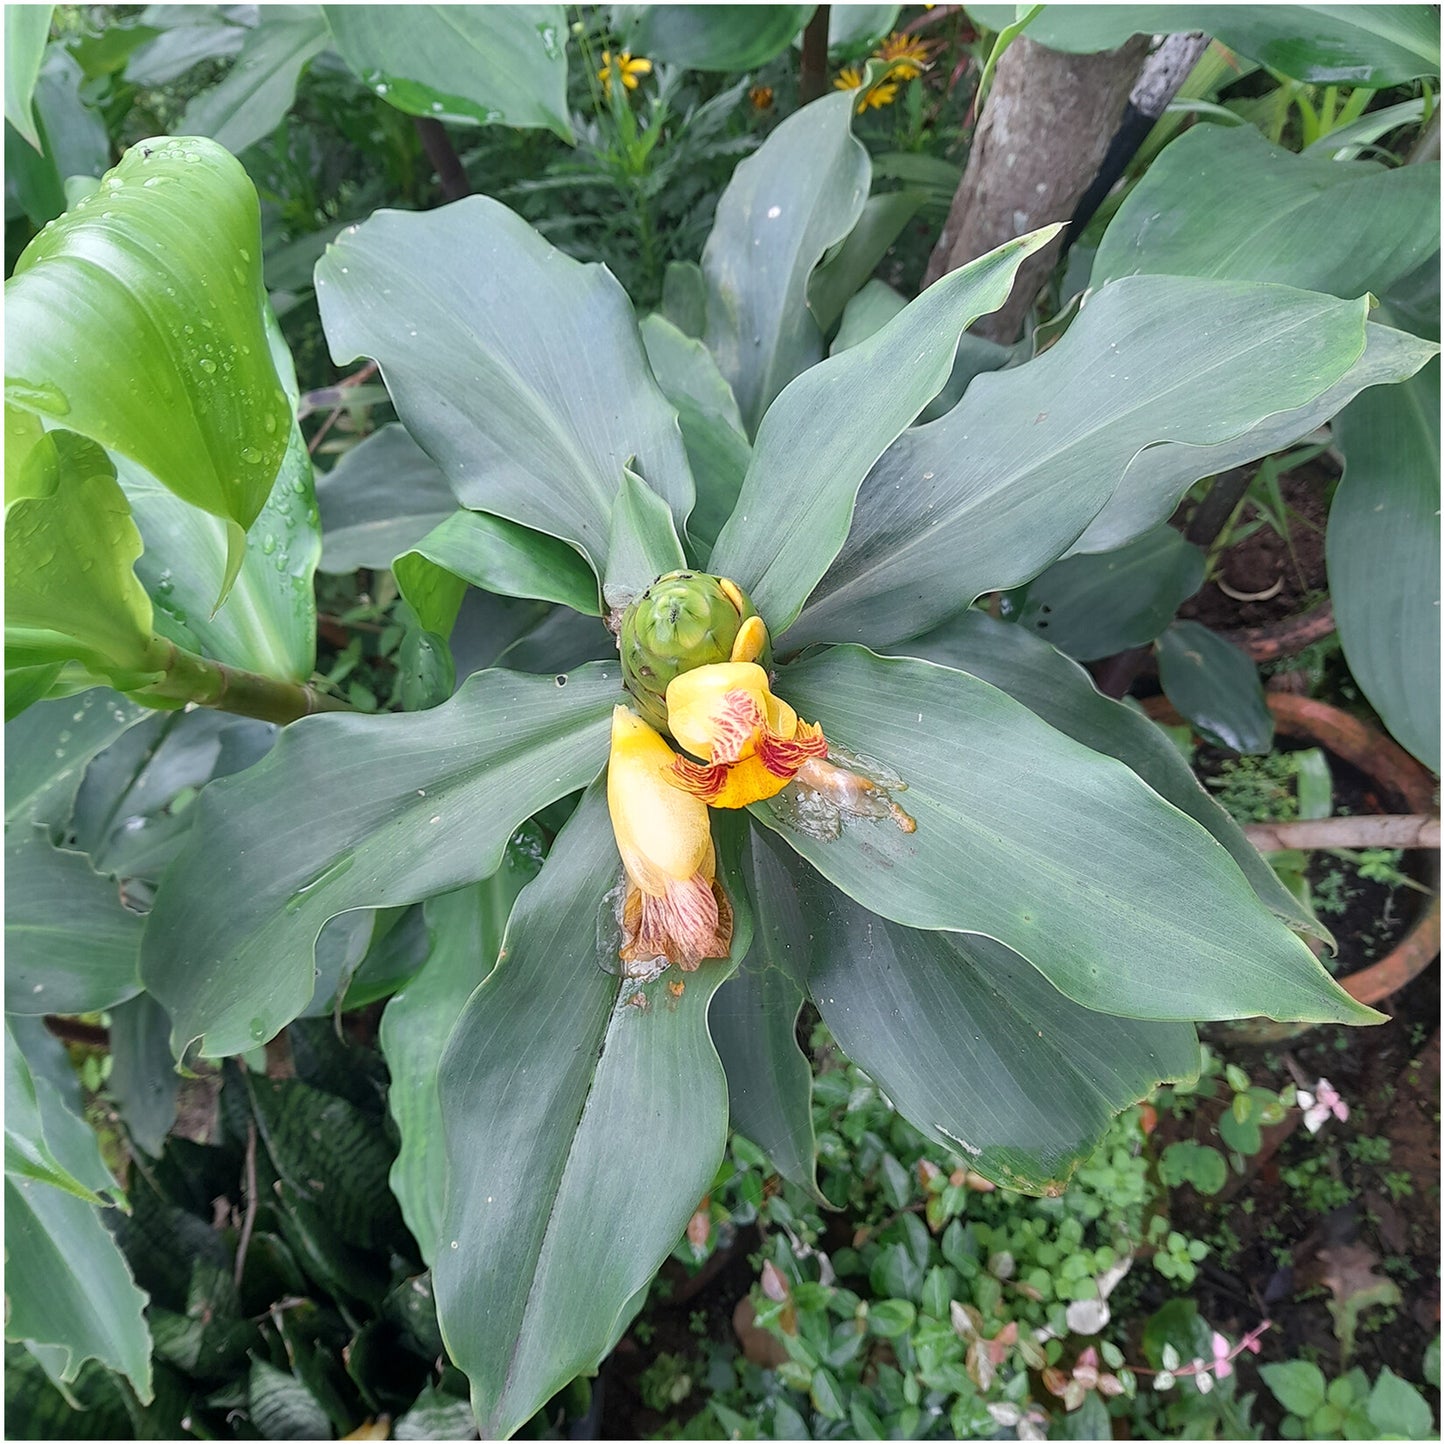 5 Live Costus Igneus Plants, Insulin Plants , With Phytosanitary certificate